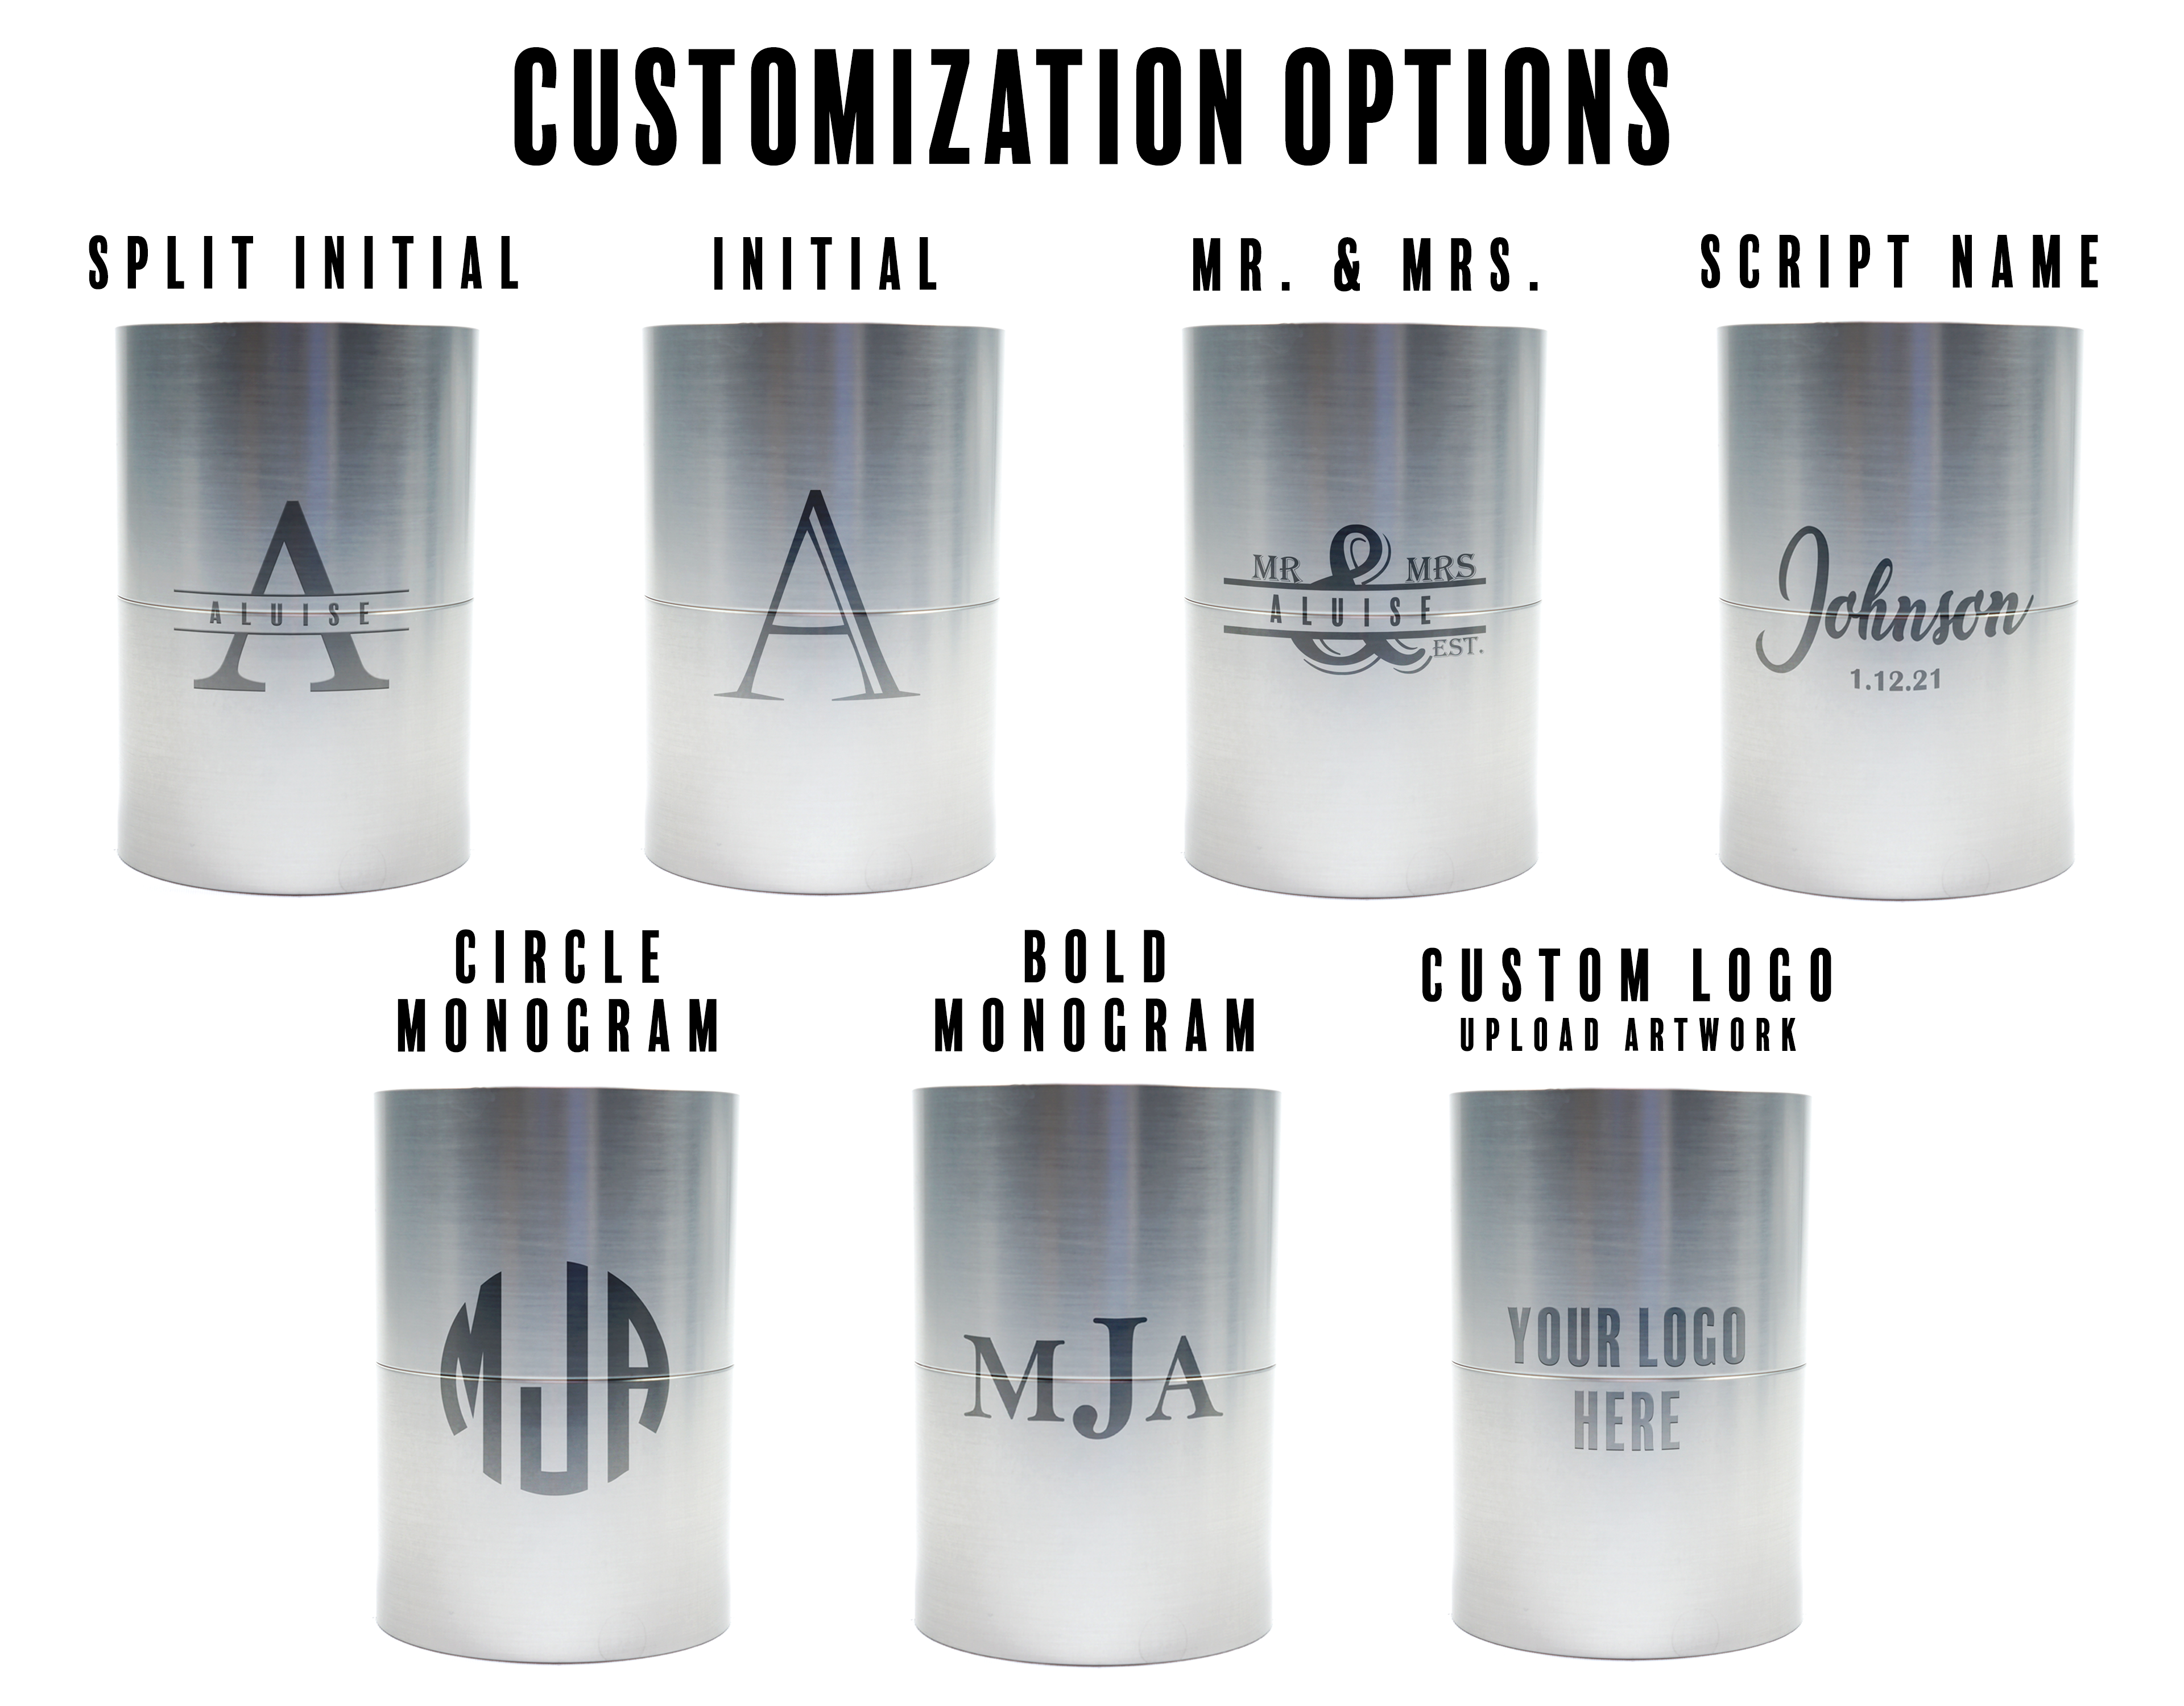 Three Benefits of a Custom Logo on Your Clear Ice Balls